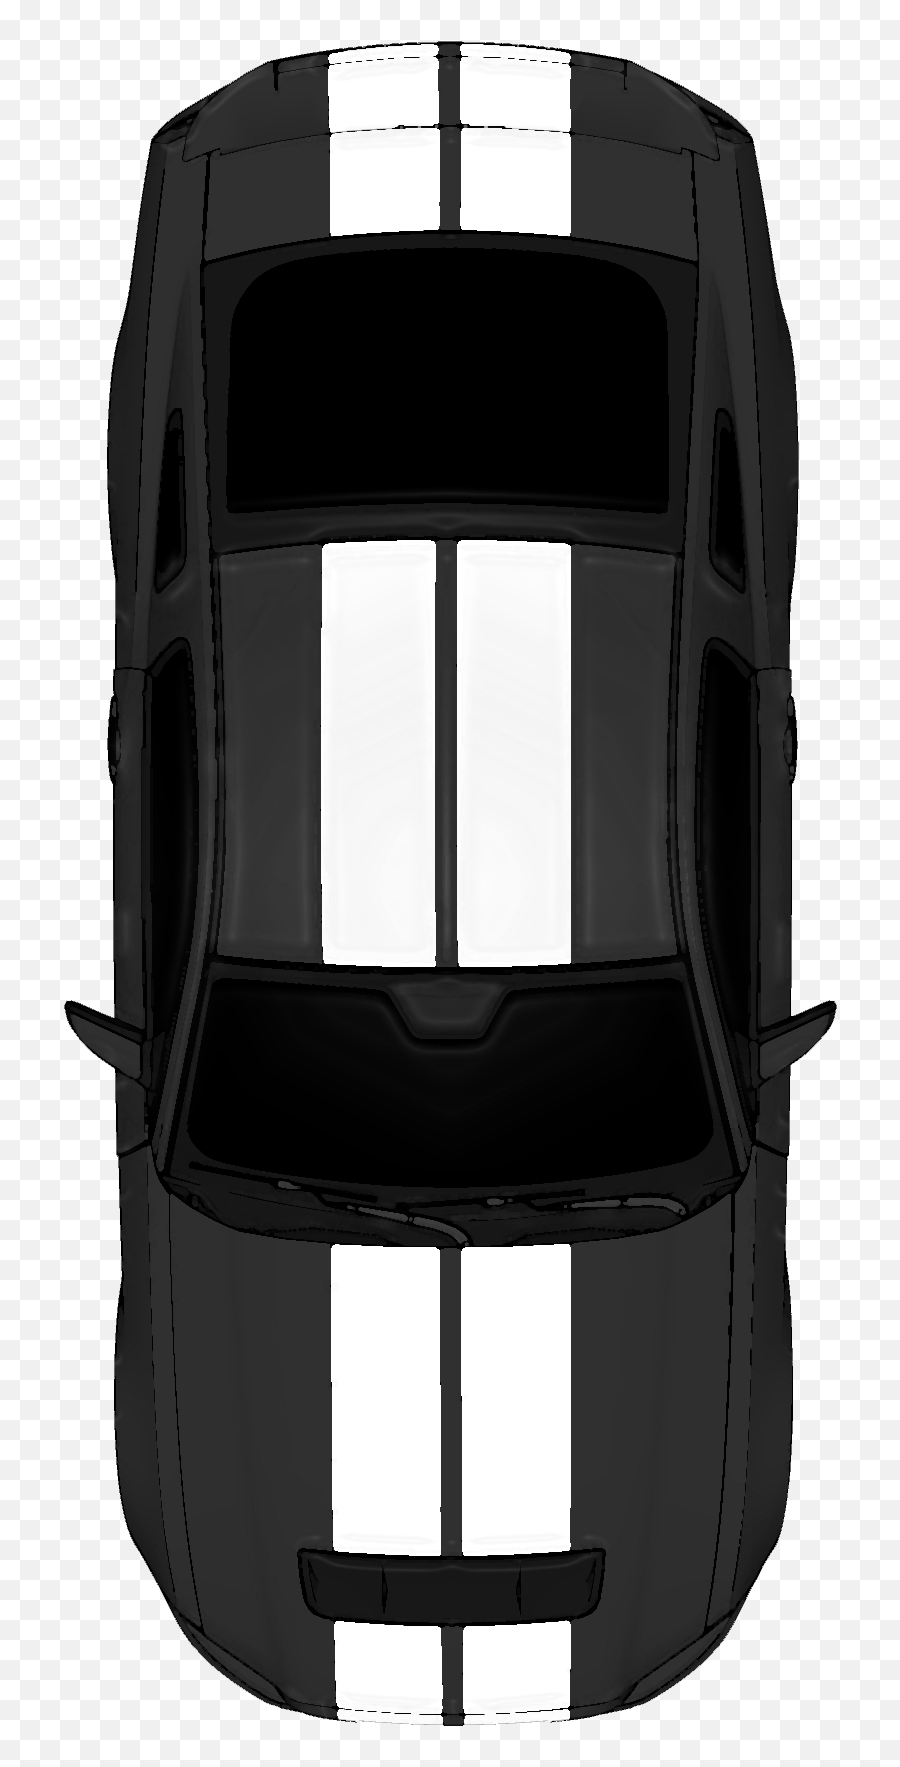 Cars Top View Png Transparent - Ford Mustang Top View,Tree Top View Png